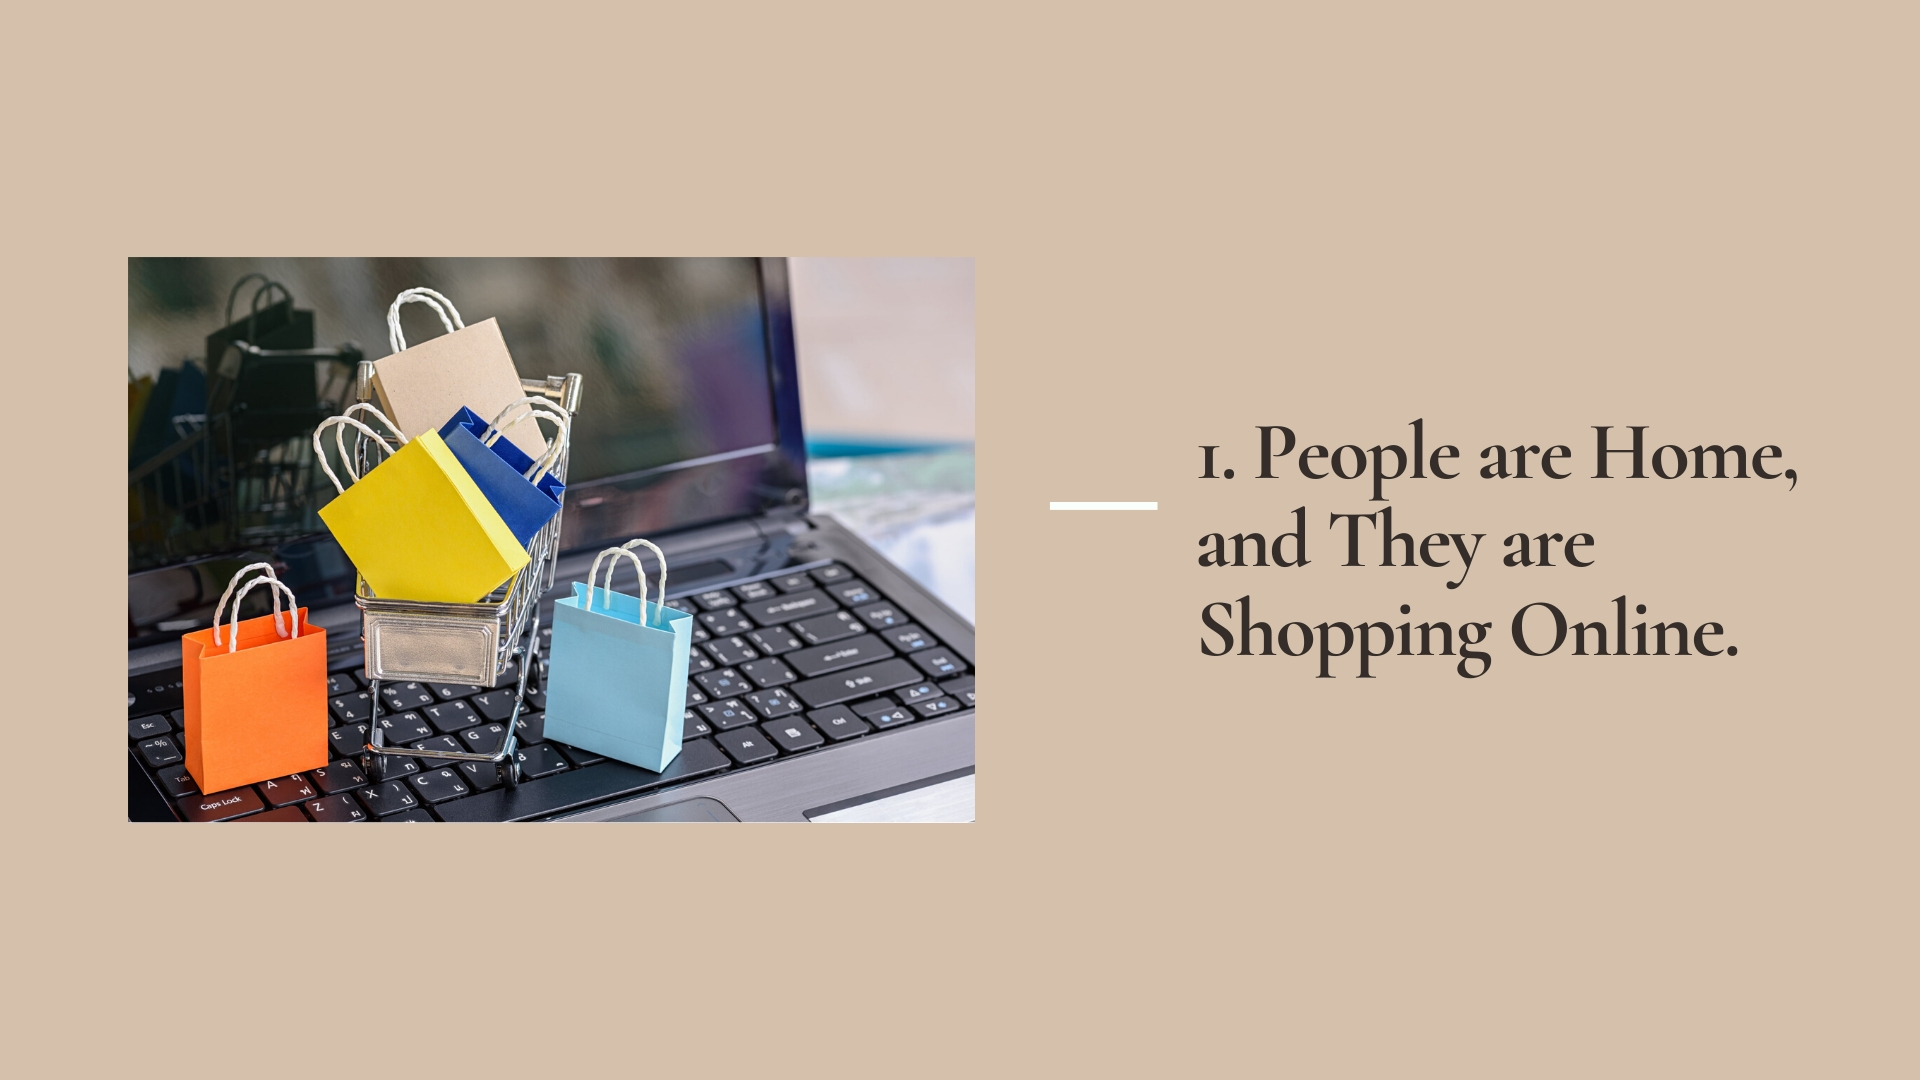 1. People are Home, and They are Shopping Online | 5 Tips for Digital Marketing During the Coronavirus Scare